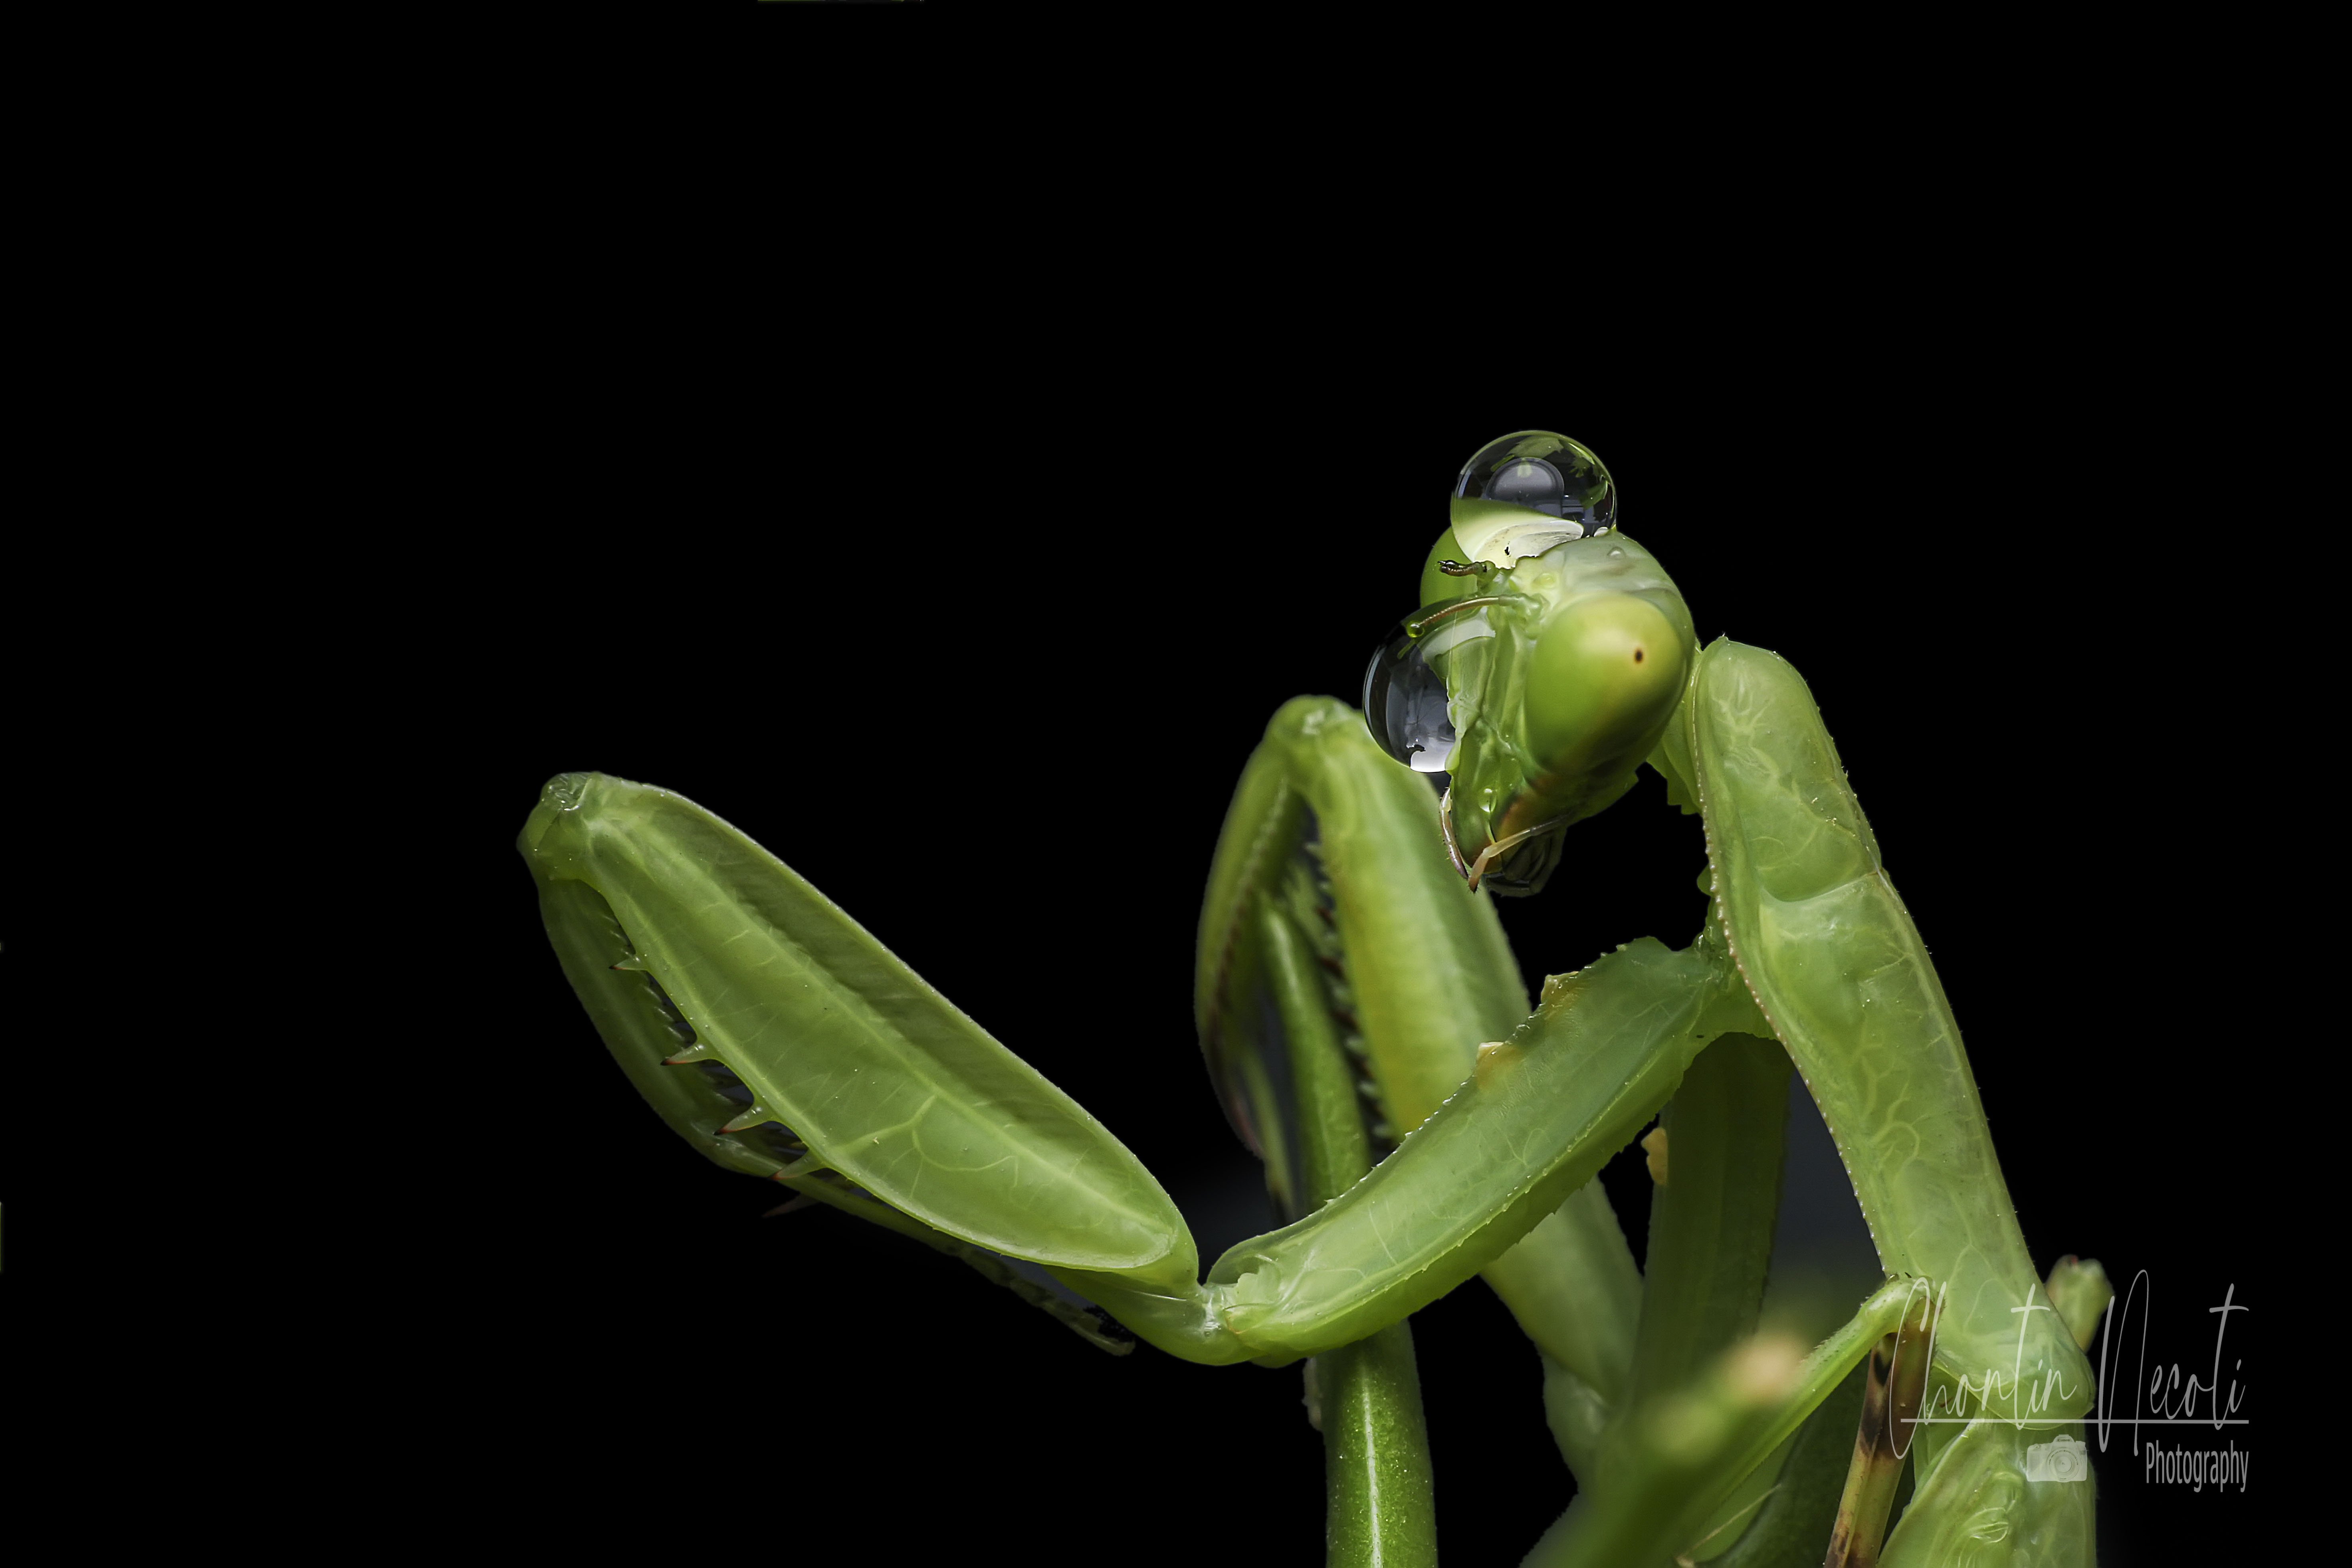 Water, drop, dew, green, small, animal, insect, garden, nature, natural, wildlie, macro, close up, beauty, beautiful, mantis, prey, fly, eating, , NeCoTi ChonTin